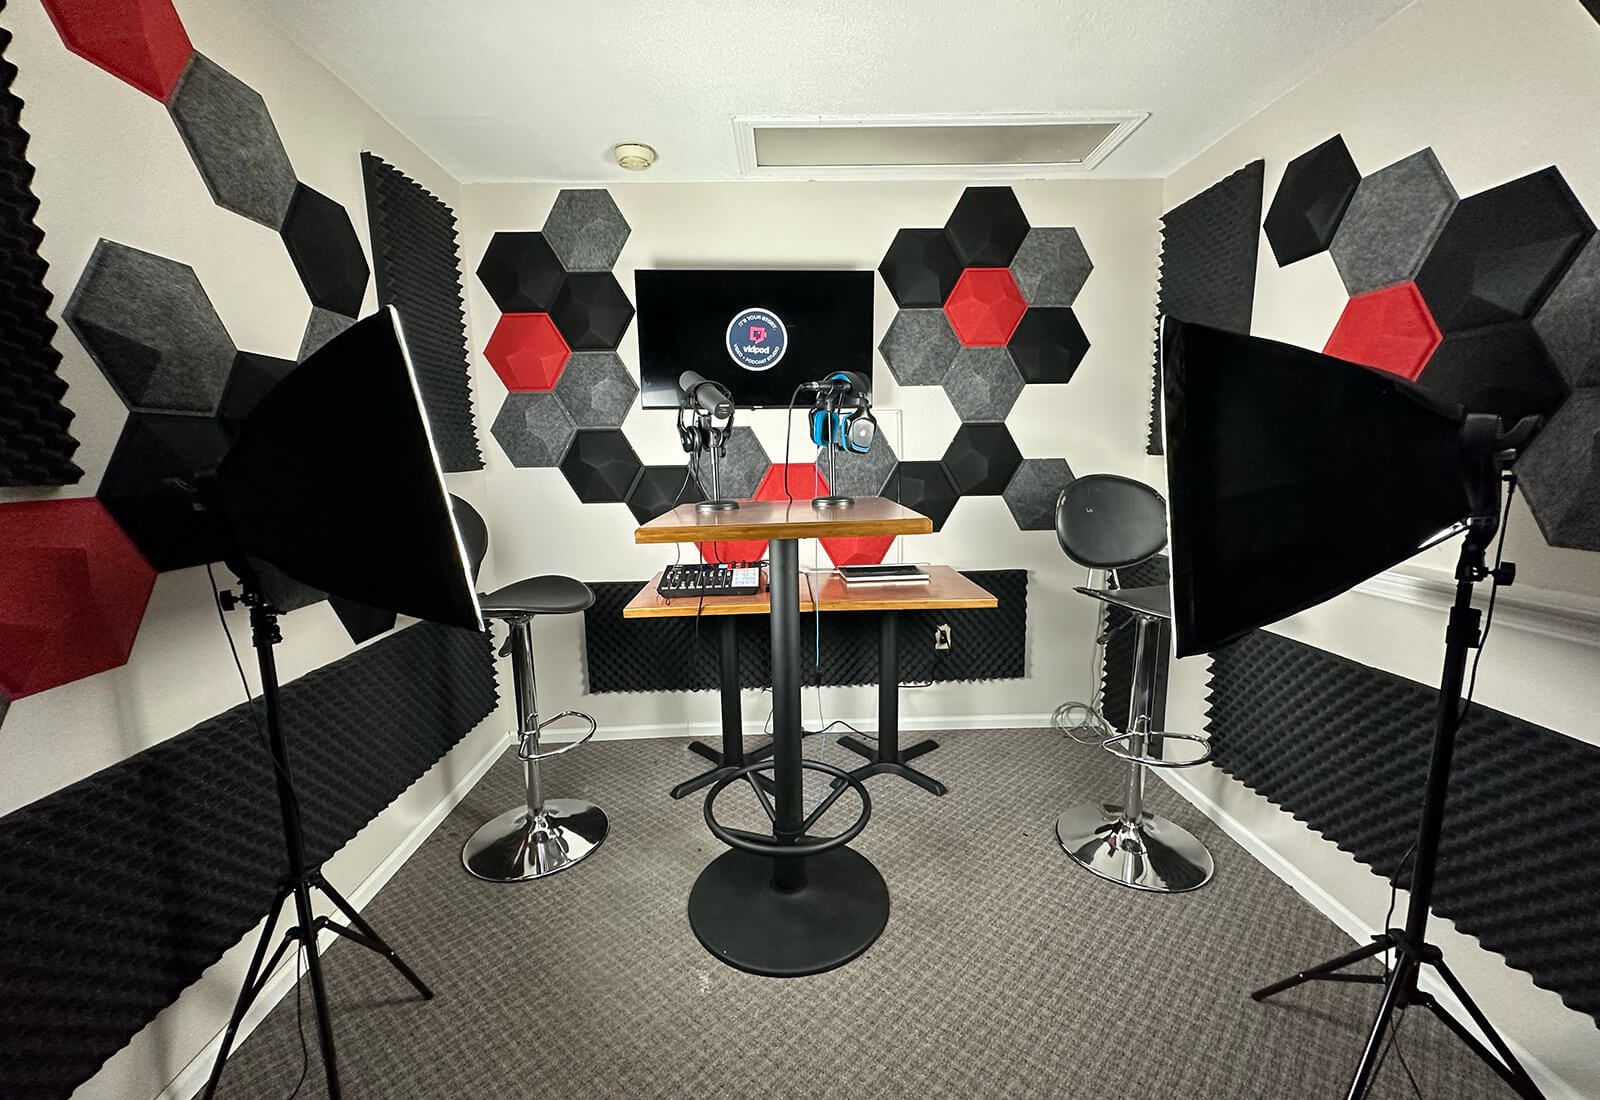 Inside Vidpod Studio Video and podcasting recording studio in downtown Parksville, BC